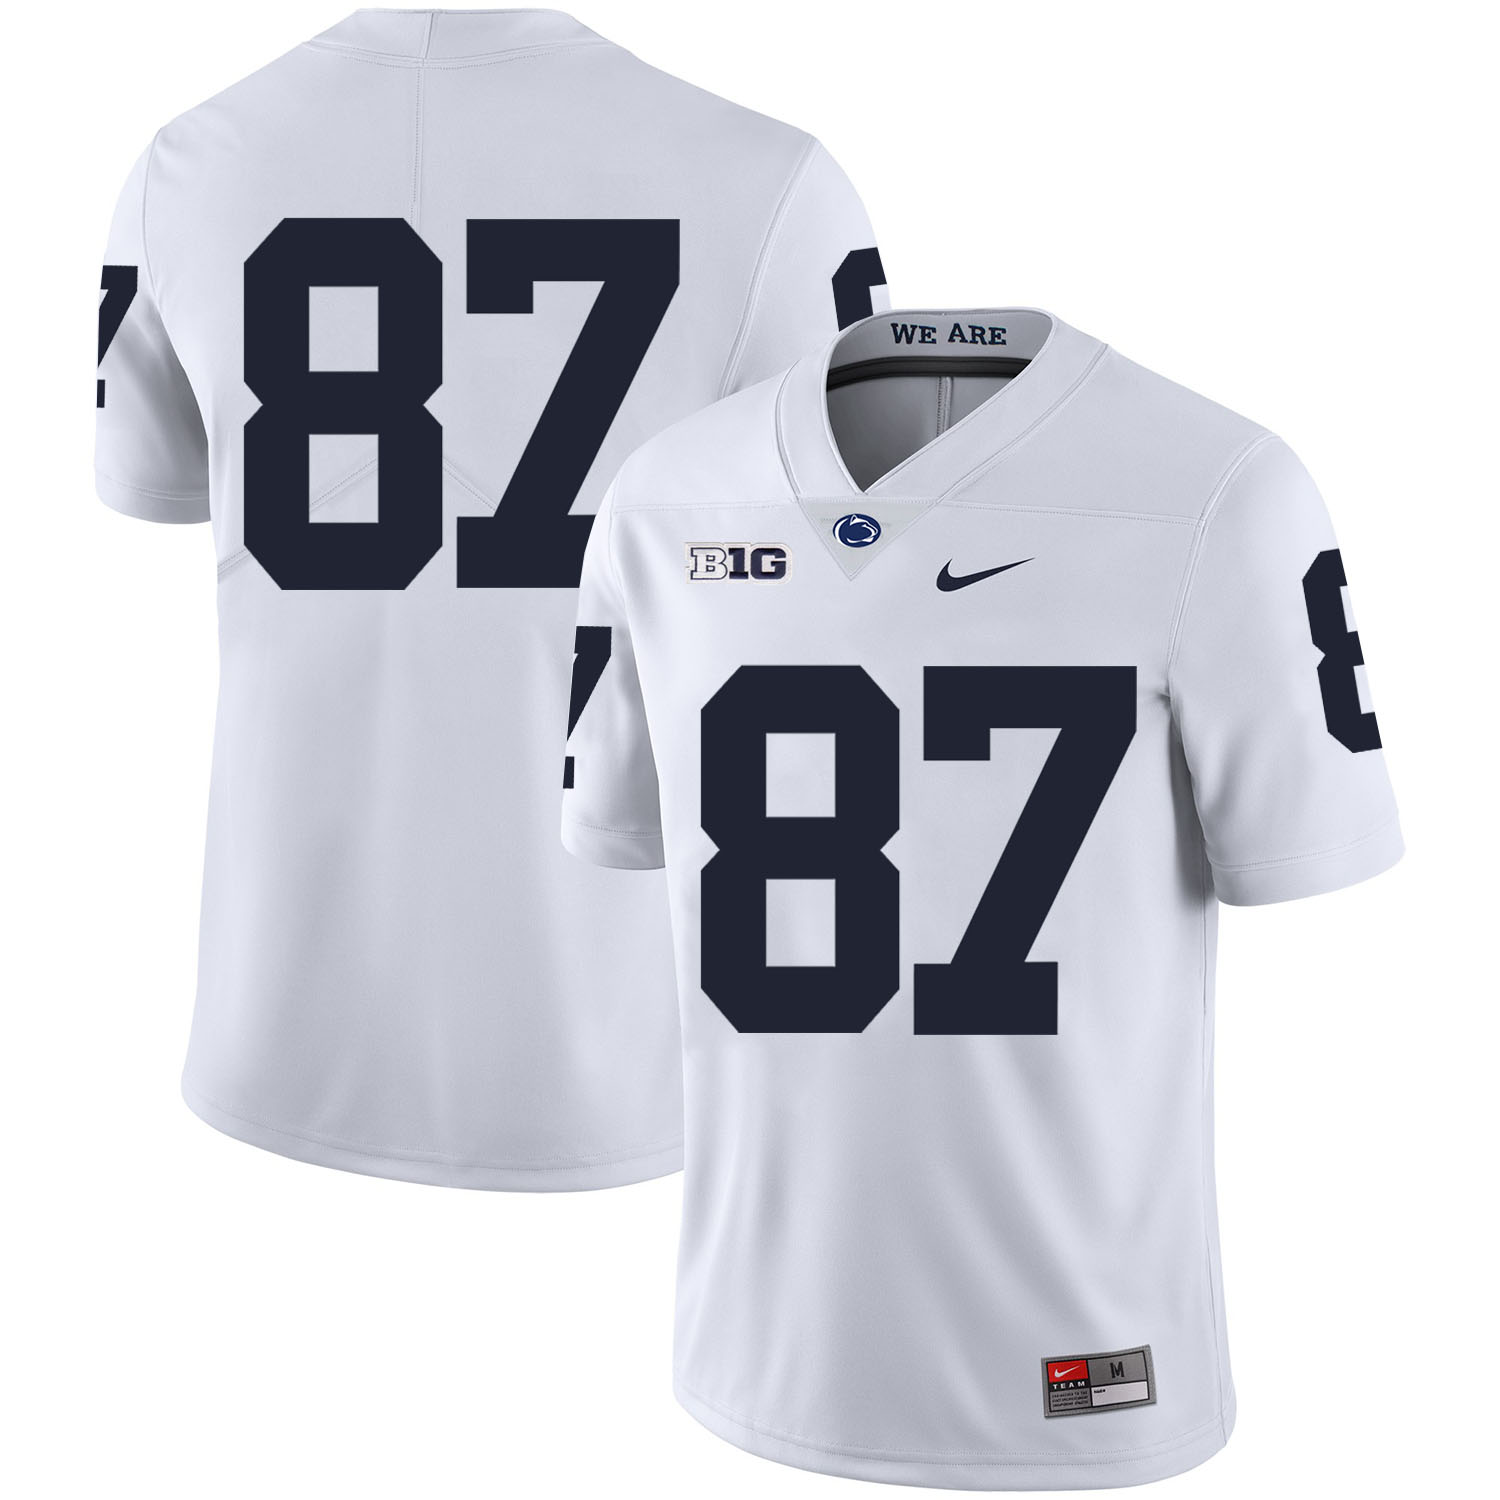 Penn State Nittany Lions 87 Kyle Carter White Nike College Football Jersey